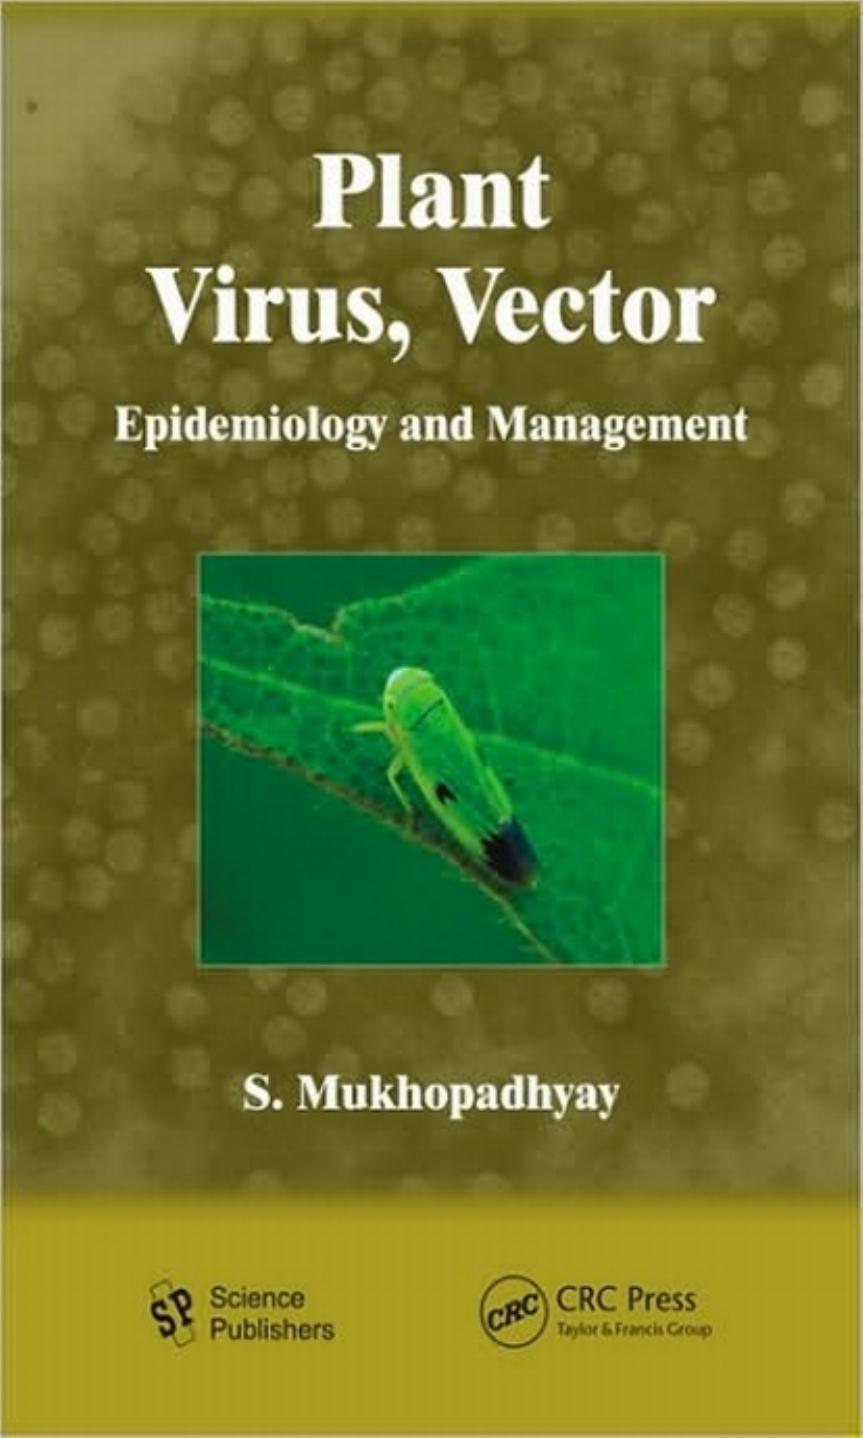 Plant Virus, Vector: Epidemiology and Management